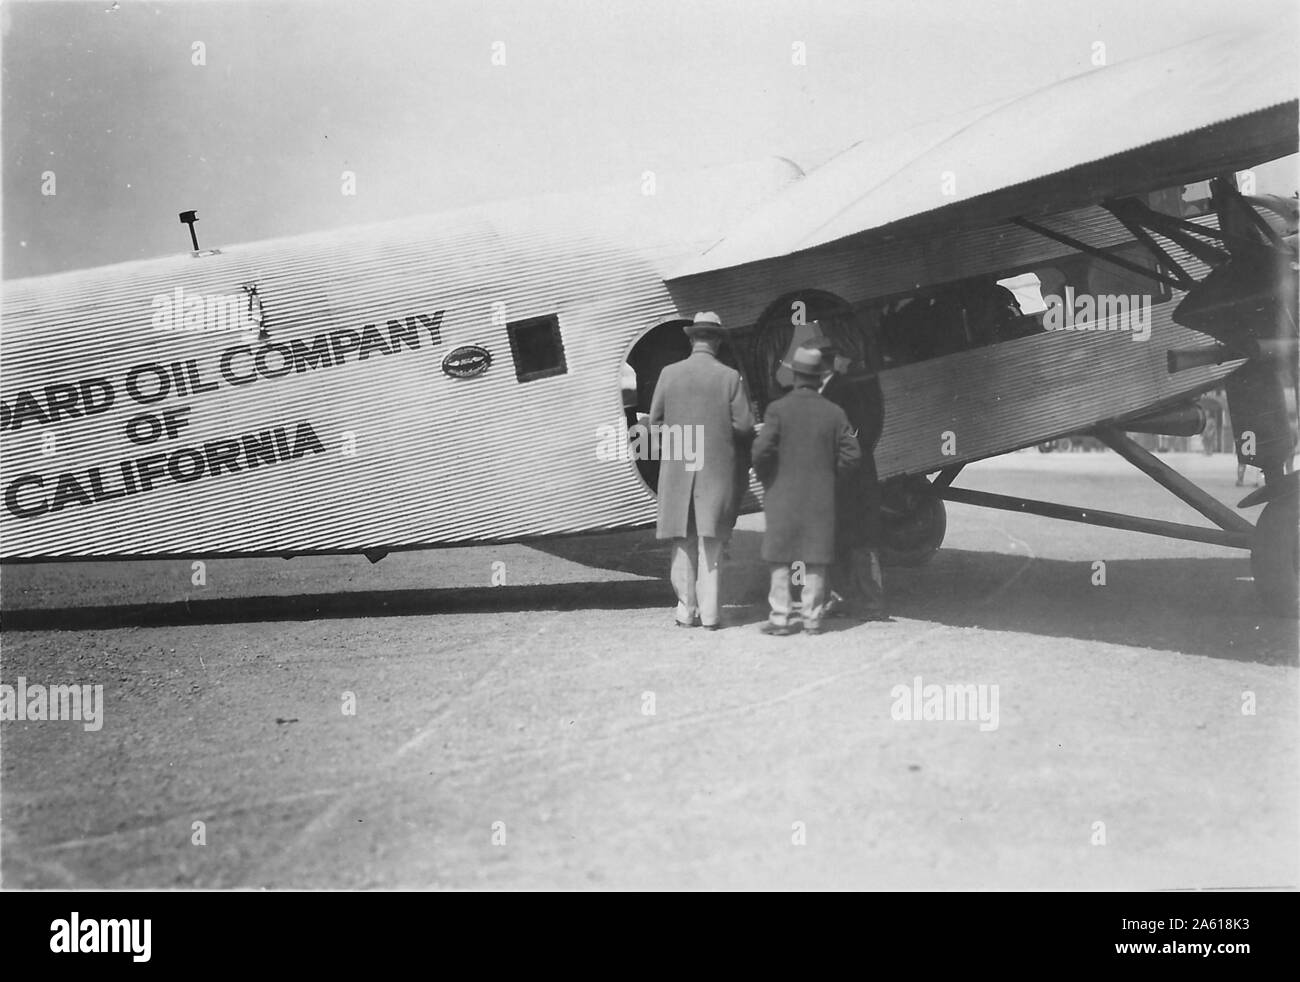 Ford Trimotor aircraft, branded as Standard Oil Number 1 and used to promote Standard Oil of California's aviation fuels, at Mills Field (now Oakland International Airport), Oakland, California, 1929. () Stock Photo